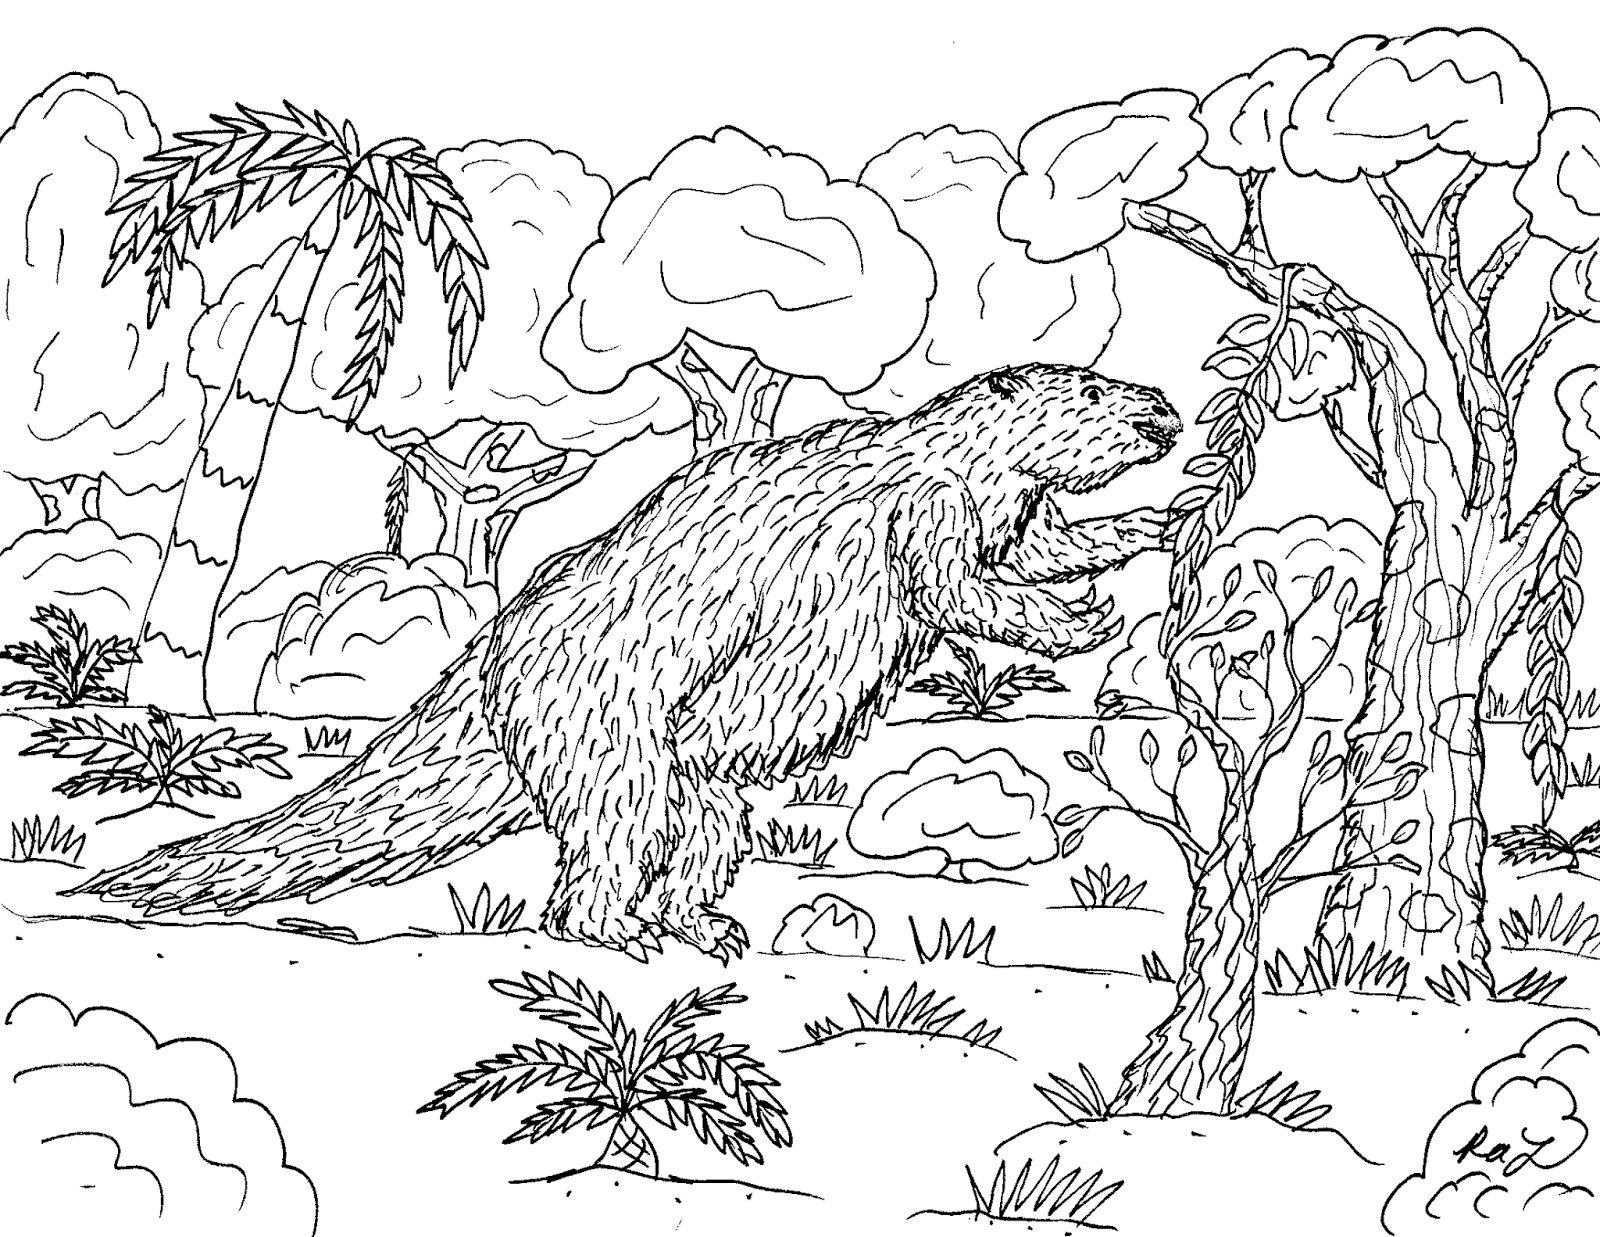 Robin's Great Coloring Pages: Giant Ground Sloth & Tree Sloth